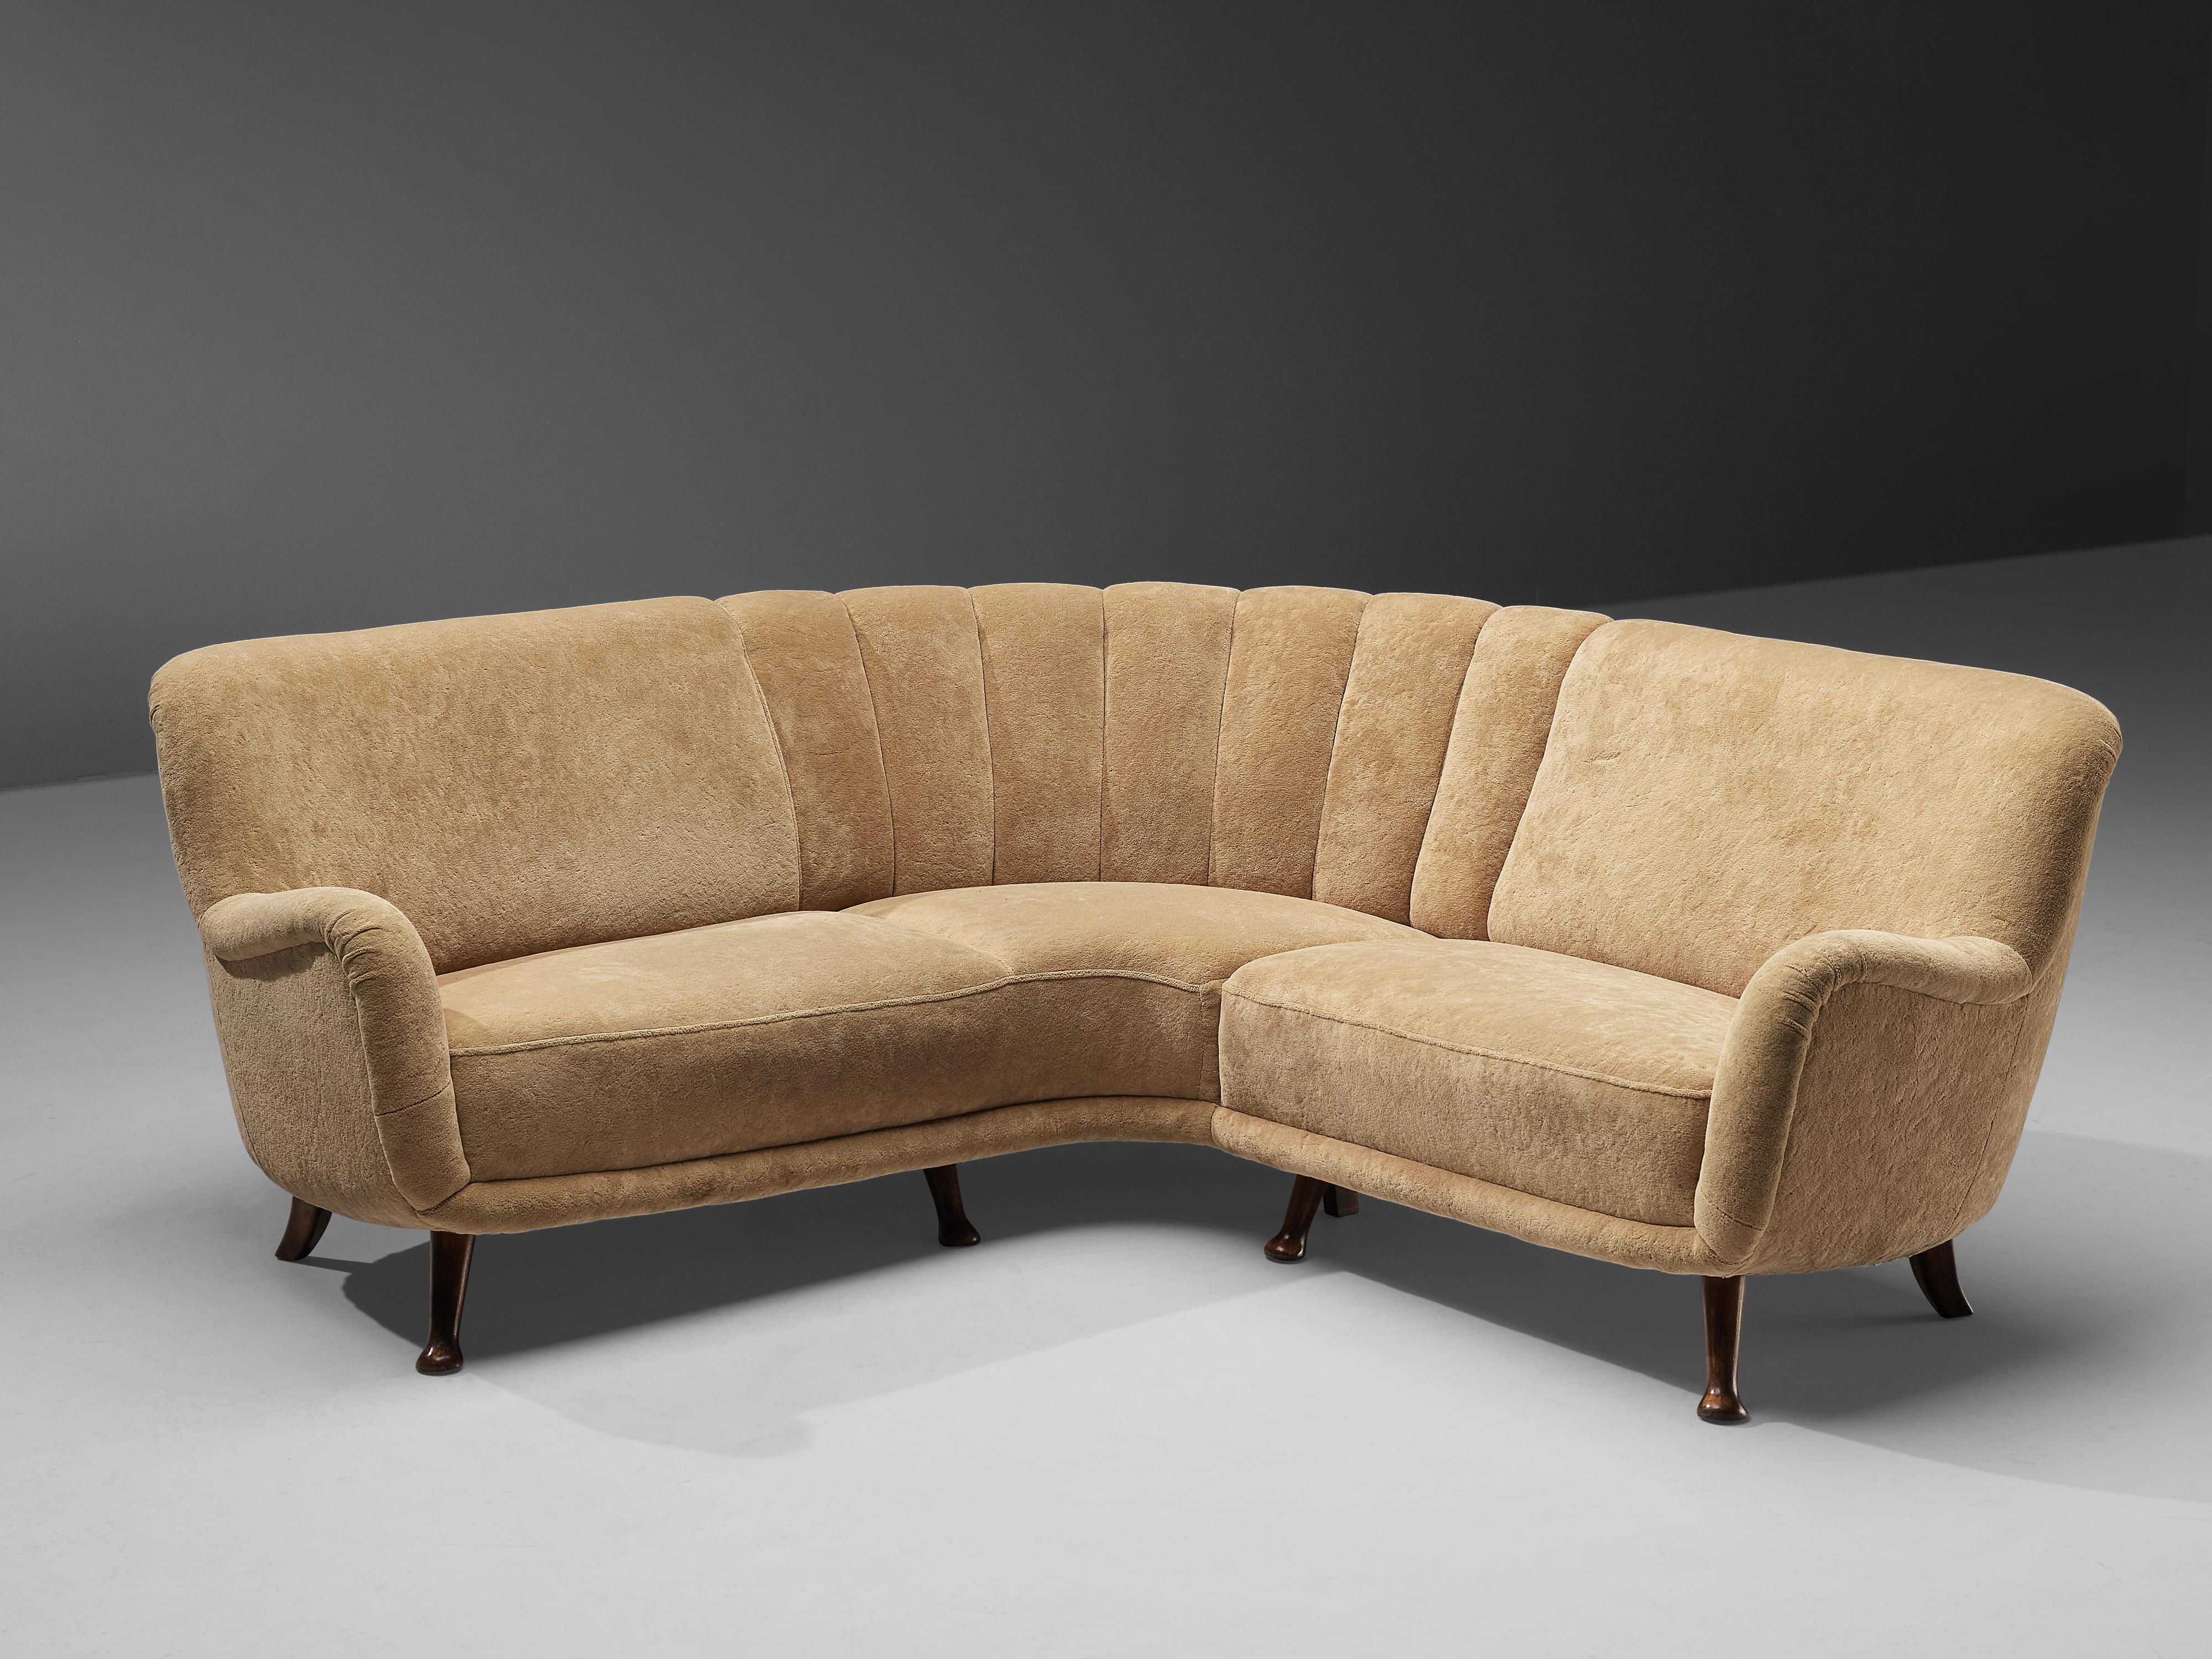 Berga Mobler, sofa, stained beech, teddy upholstery, Denmark, 1940s.

This bold and rounded corner sofa by Berga Mobler is very comfortable. The whole shell is slightly tilted backwards. The sofa rests on eight small beech legs that bend outwards